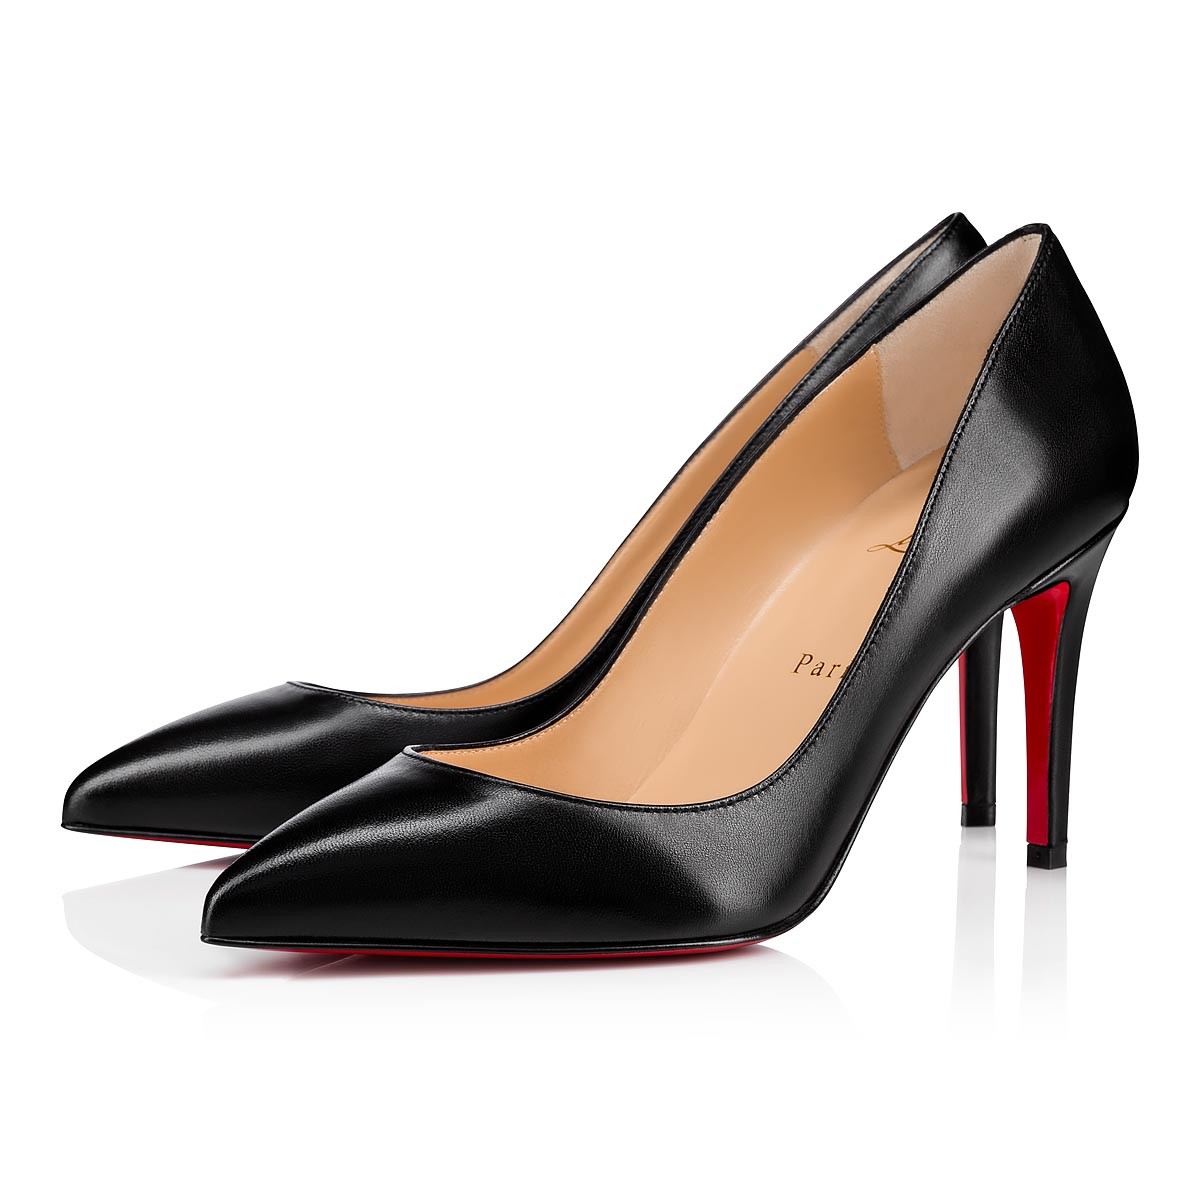 Pigalle 85 mm Pumps Black Nappa Leather